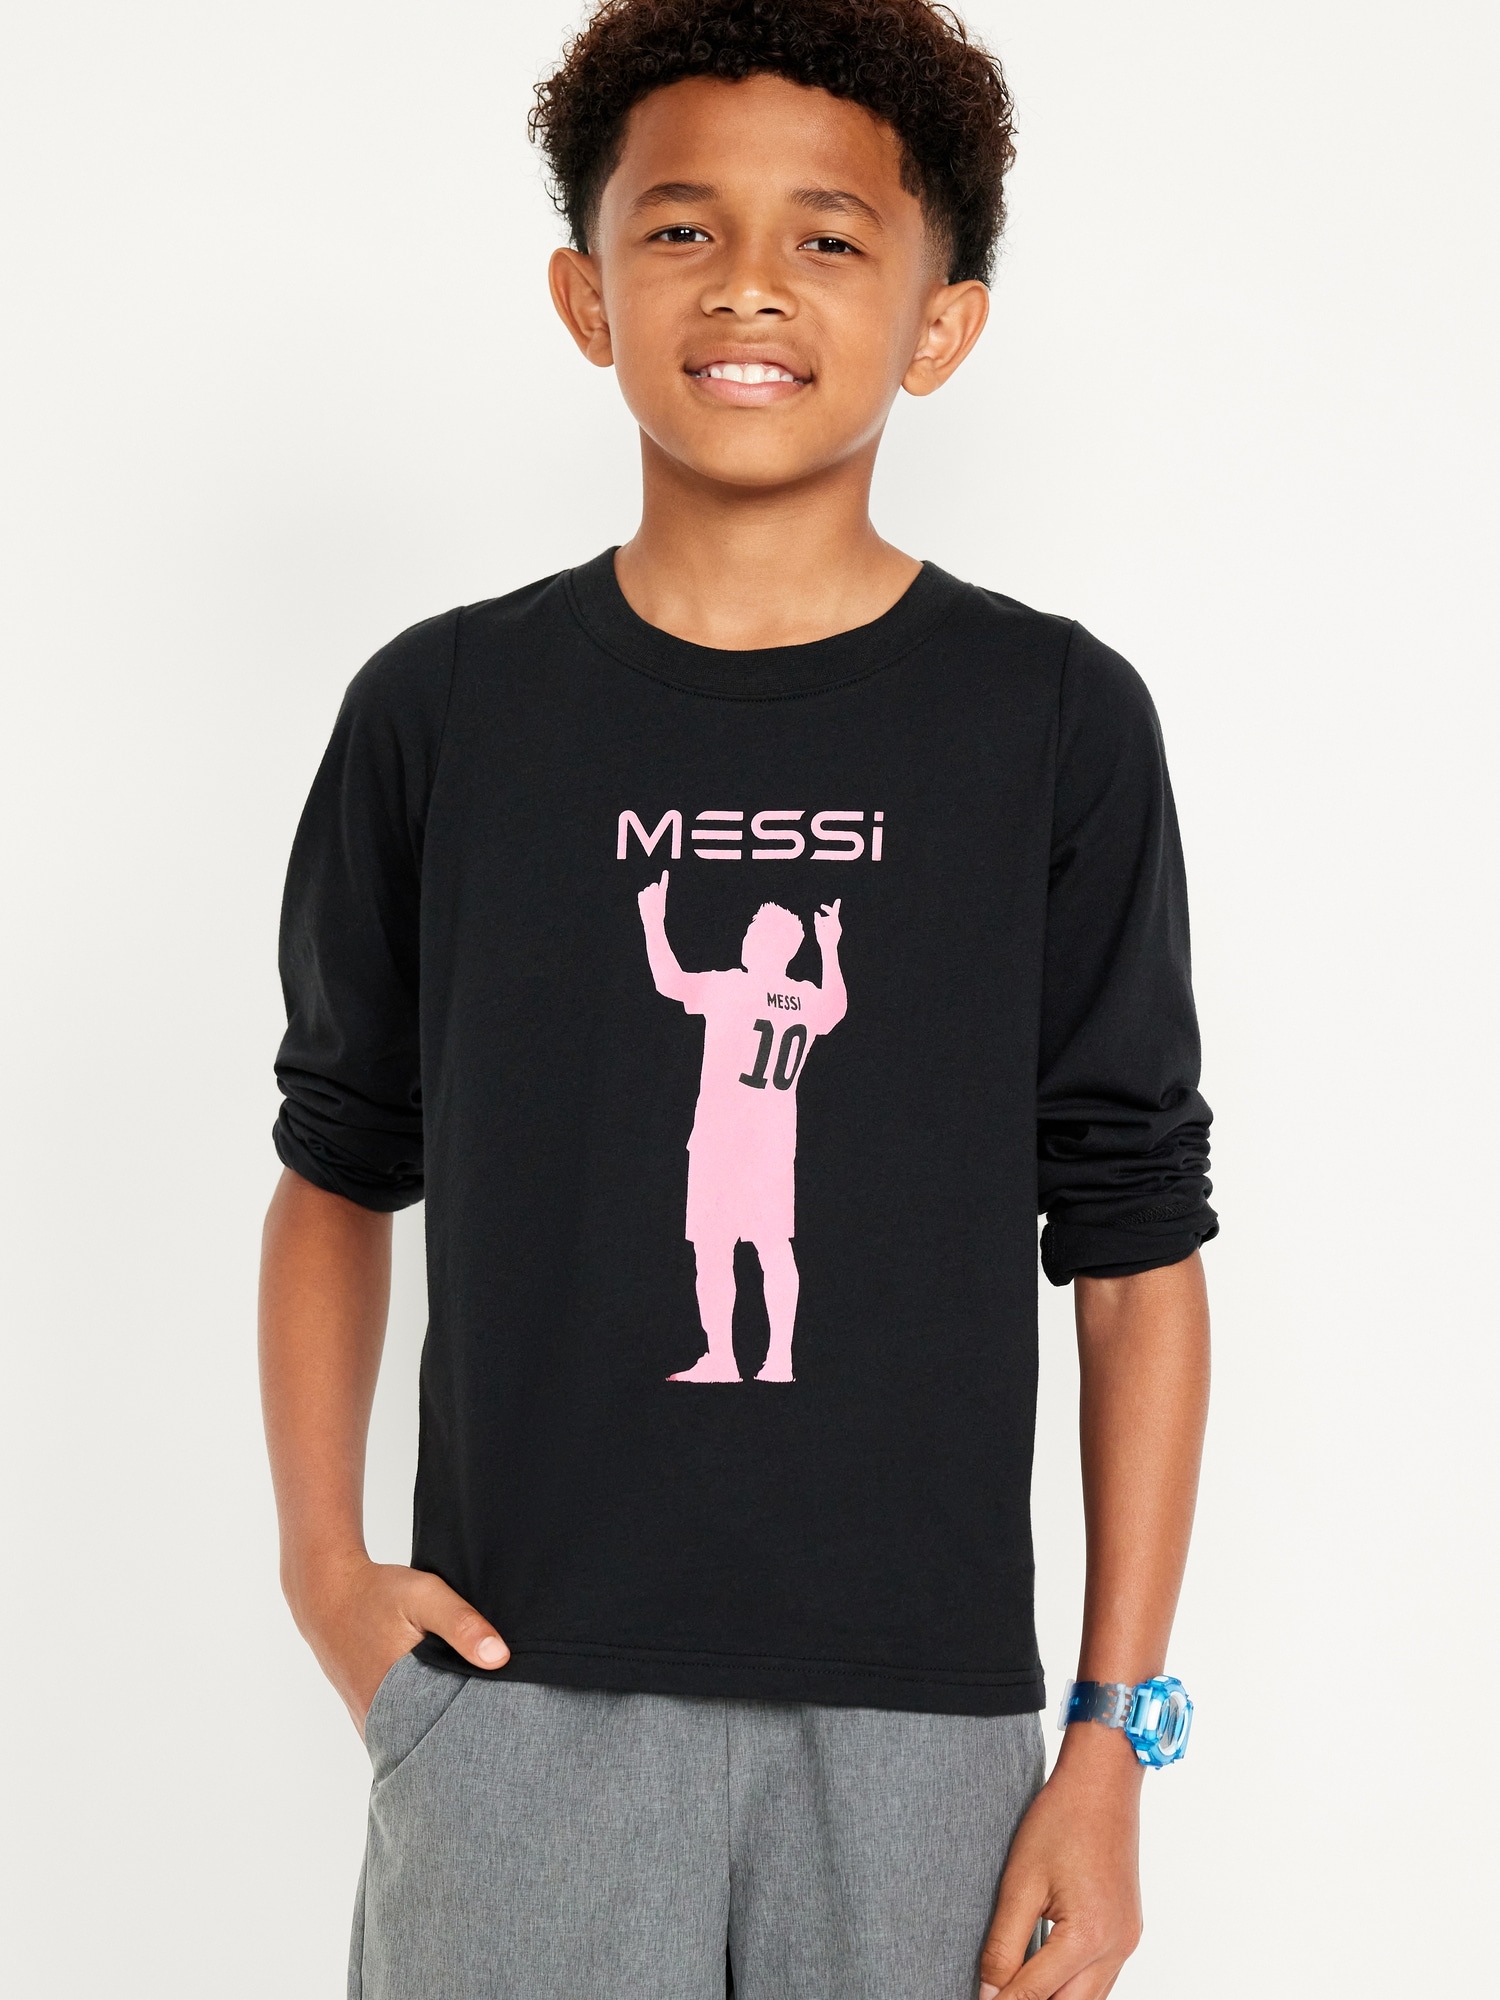 Messi™ Gender-Neutral Graphic T-Shirt for Kids